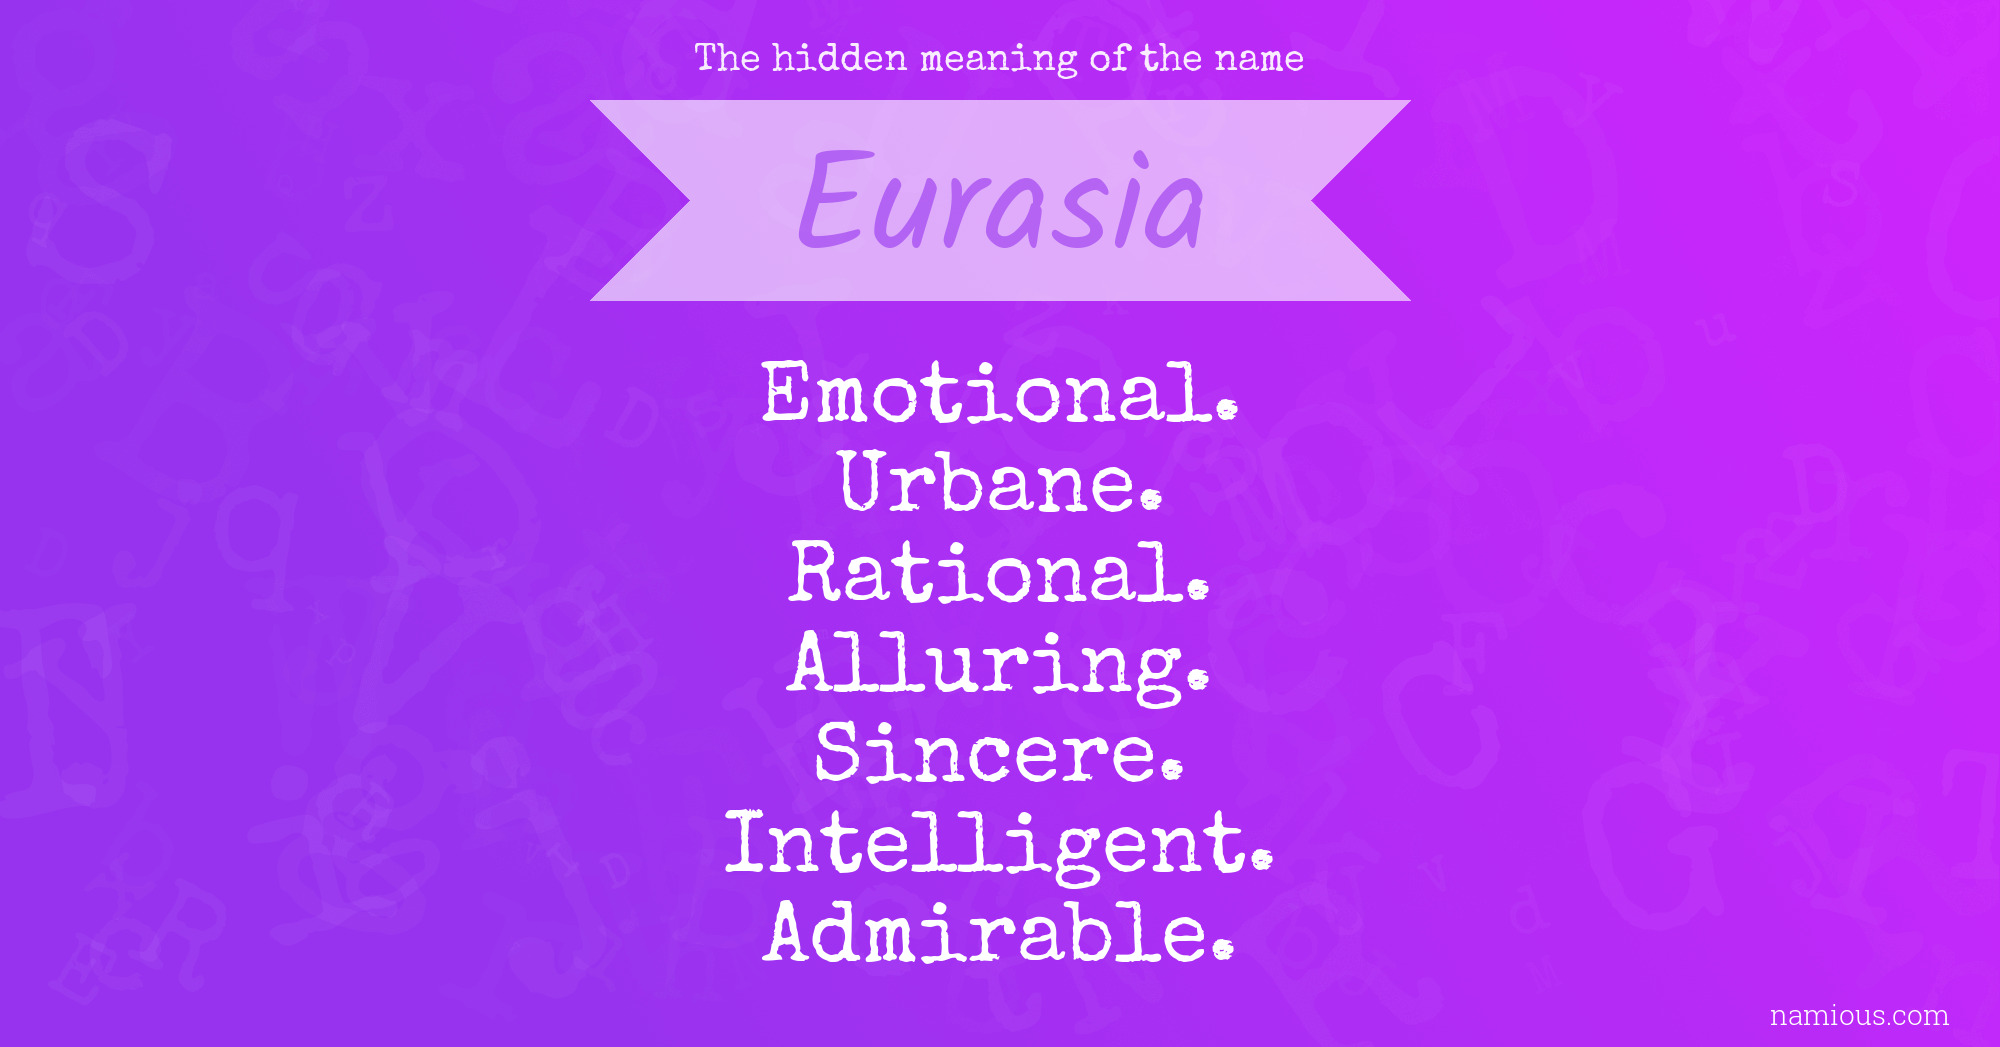 The hidden meaning of the name Eurasia